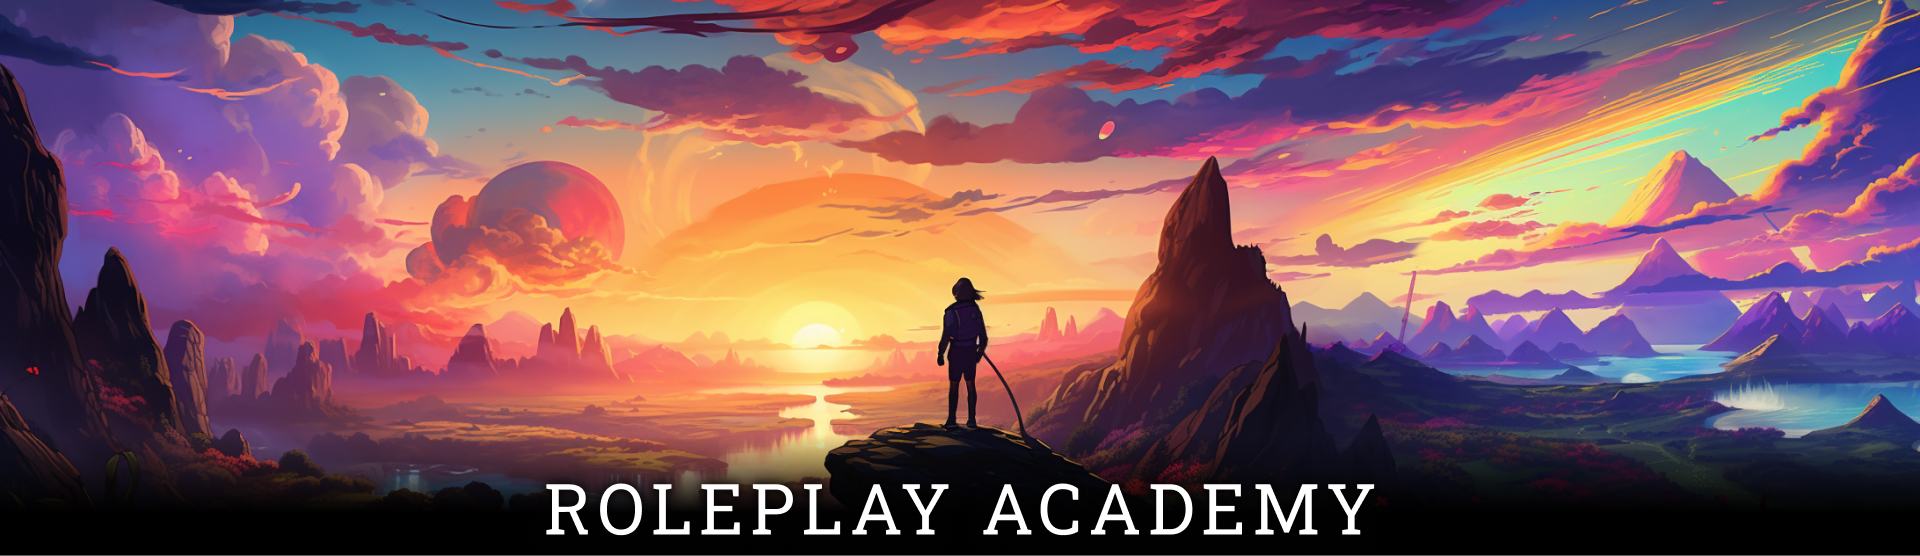 Roleplay Academy